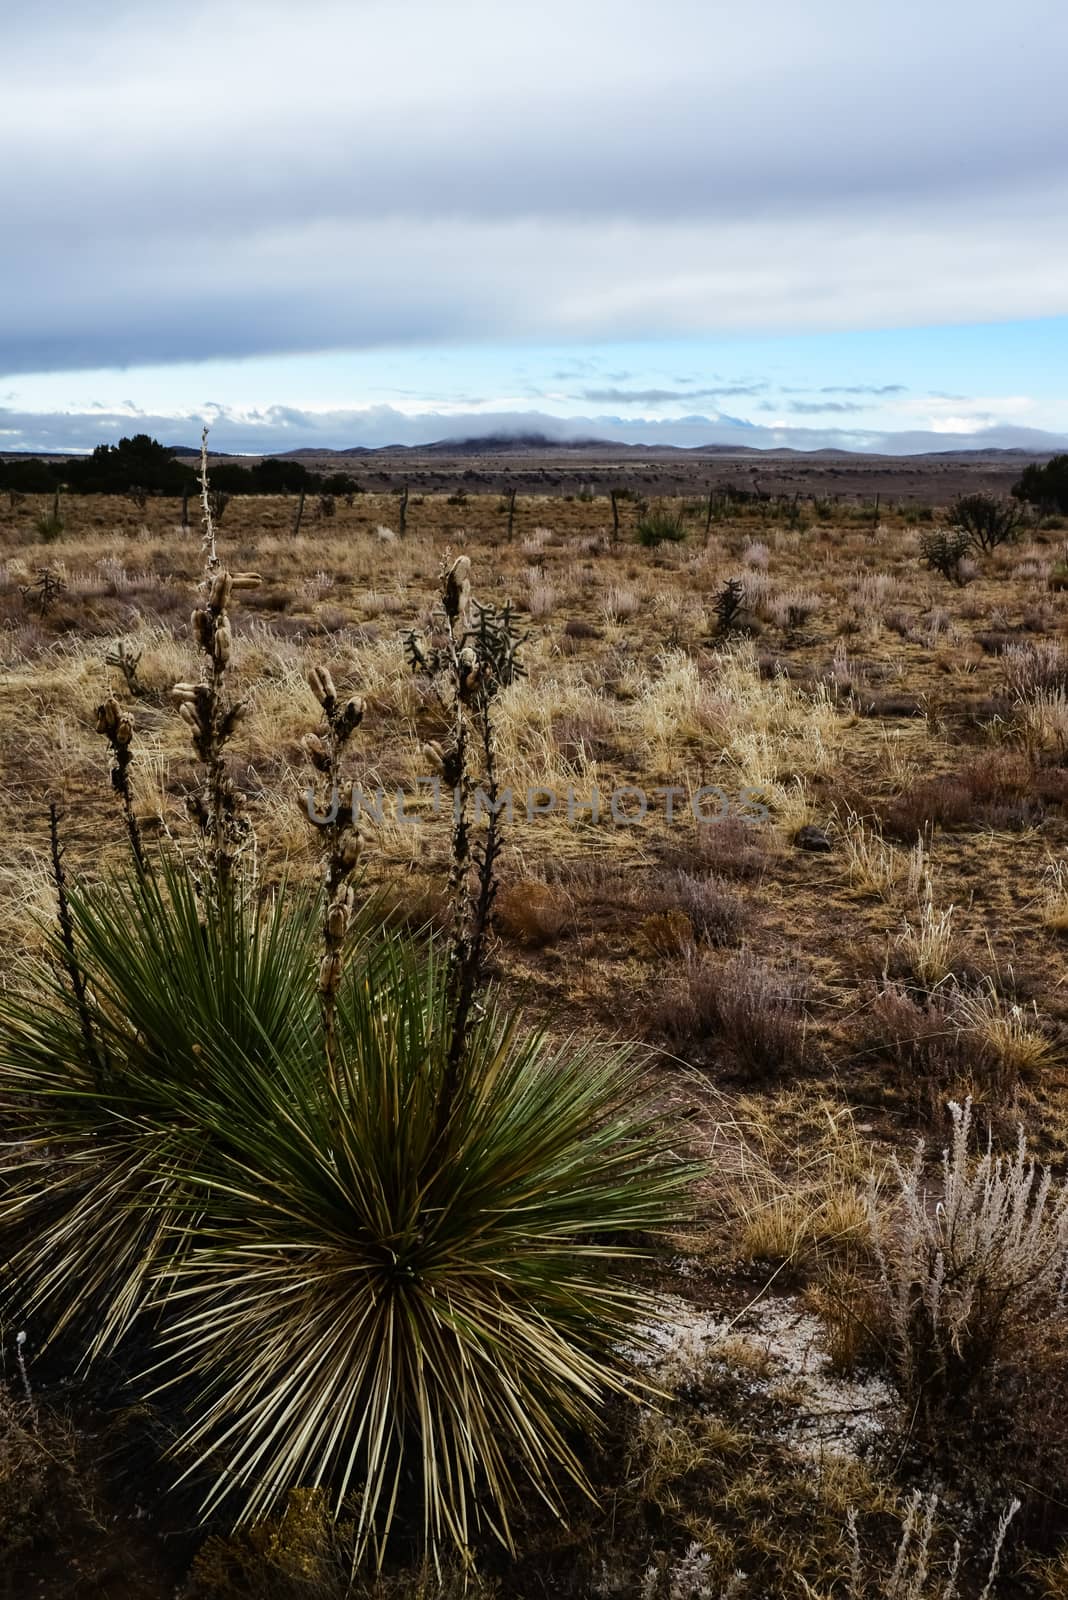 Desert landscape, yucca, cacti and desert plants on the prairies in New Mexico